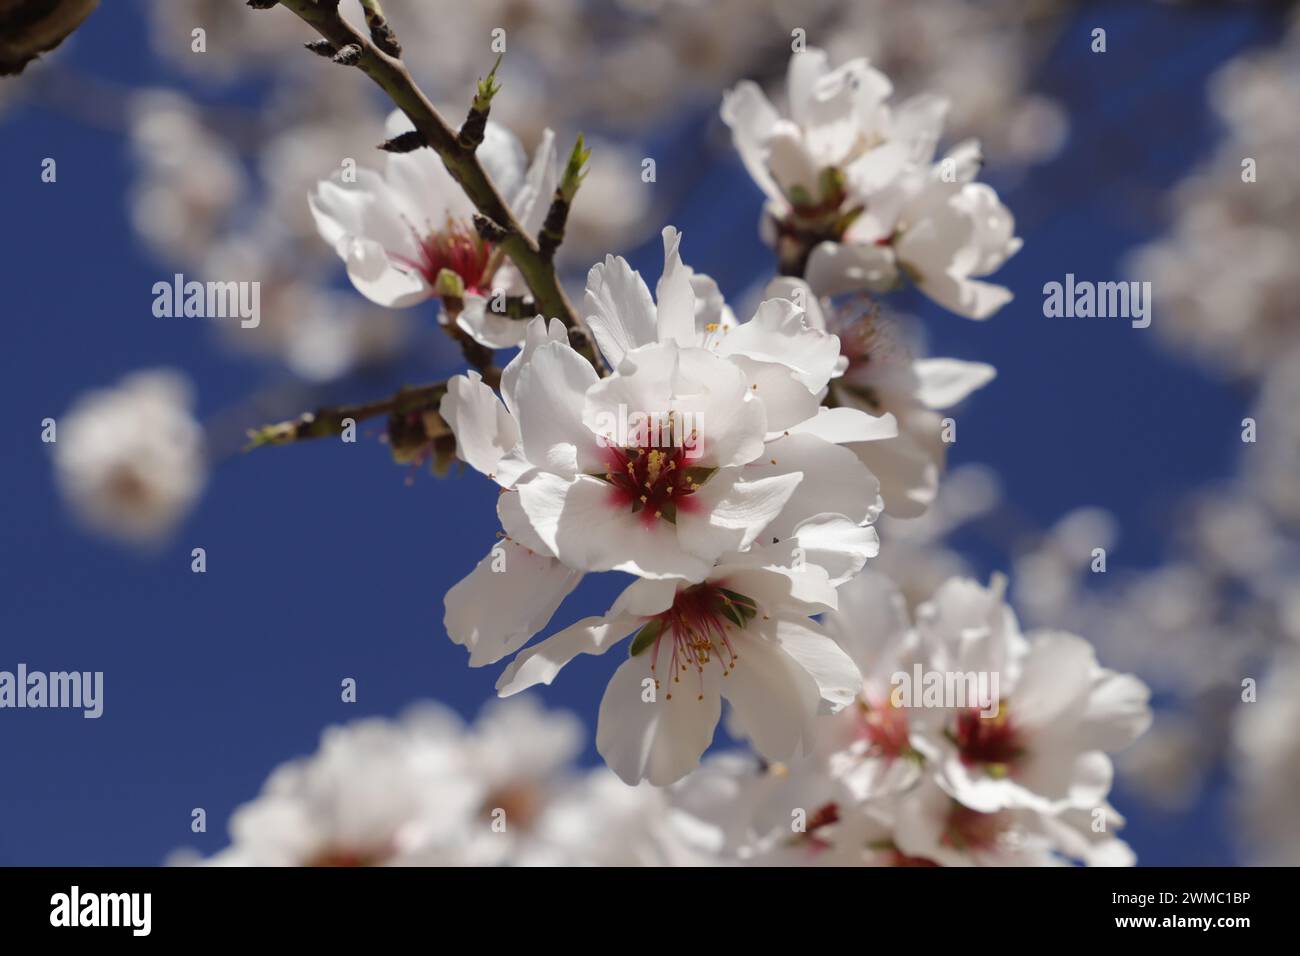 Branches of a blooming Almond tree against a clearblue sky Stock Photo